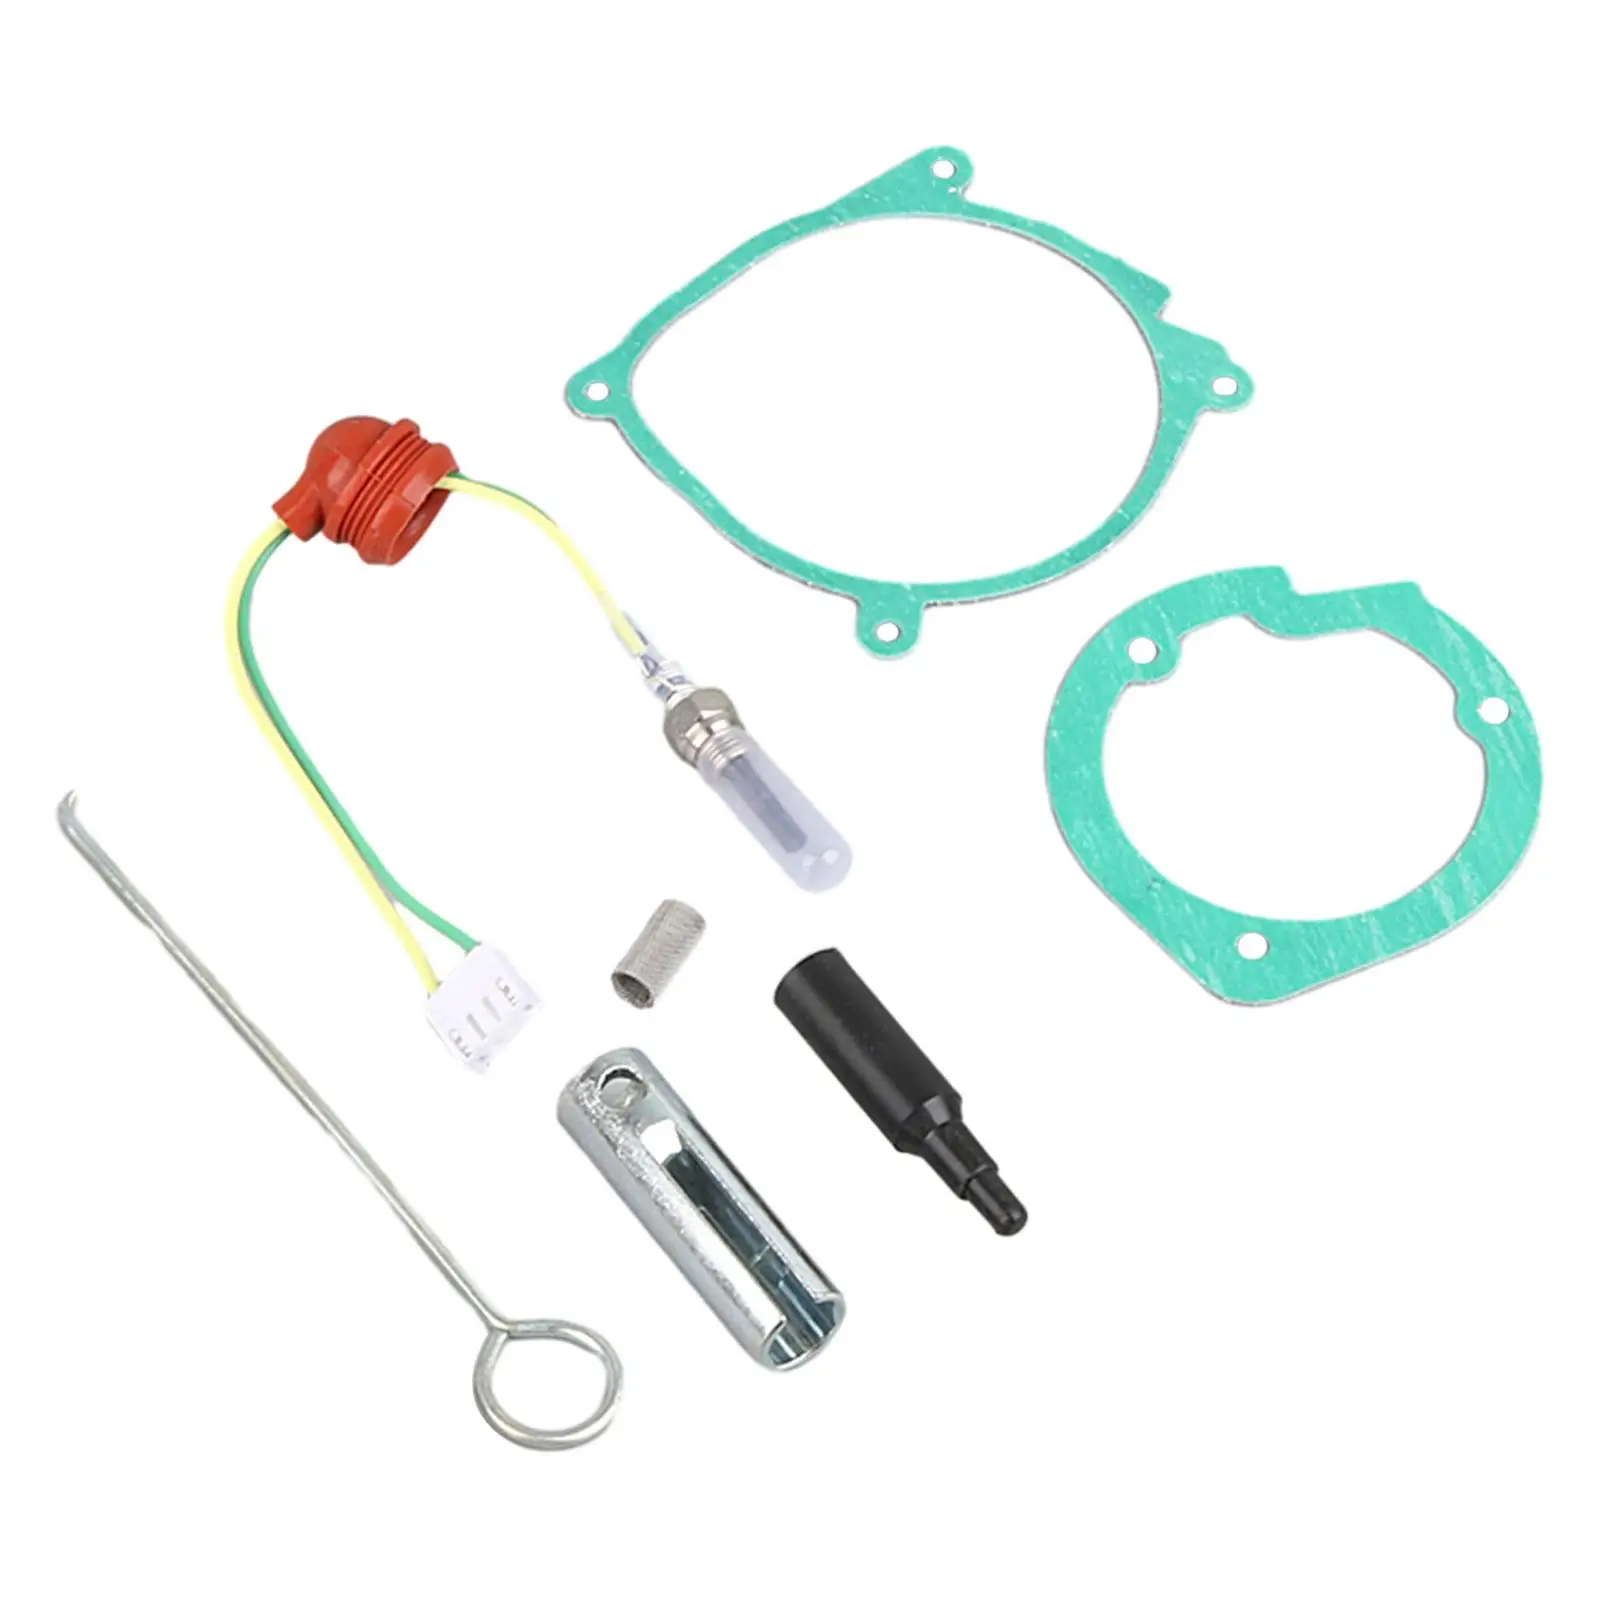 Glow Plug Repair Kit Parts Maintenance Supplies Gasket Sturdy Seal Repair Parts for 12V 2kW Parking Heater Boat Truck Truck